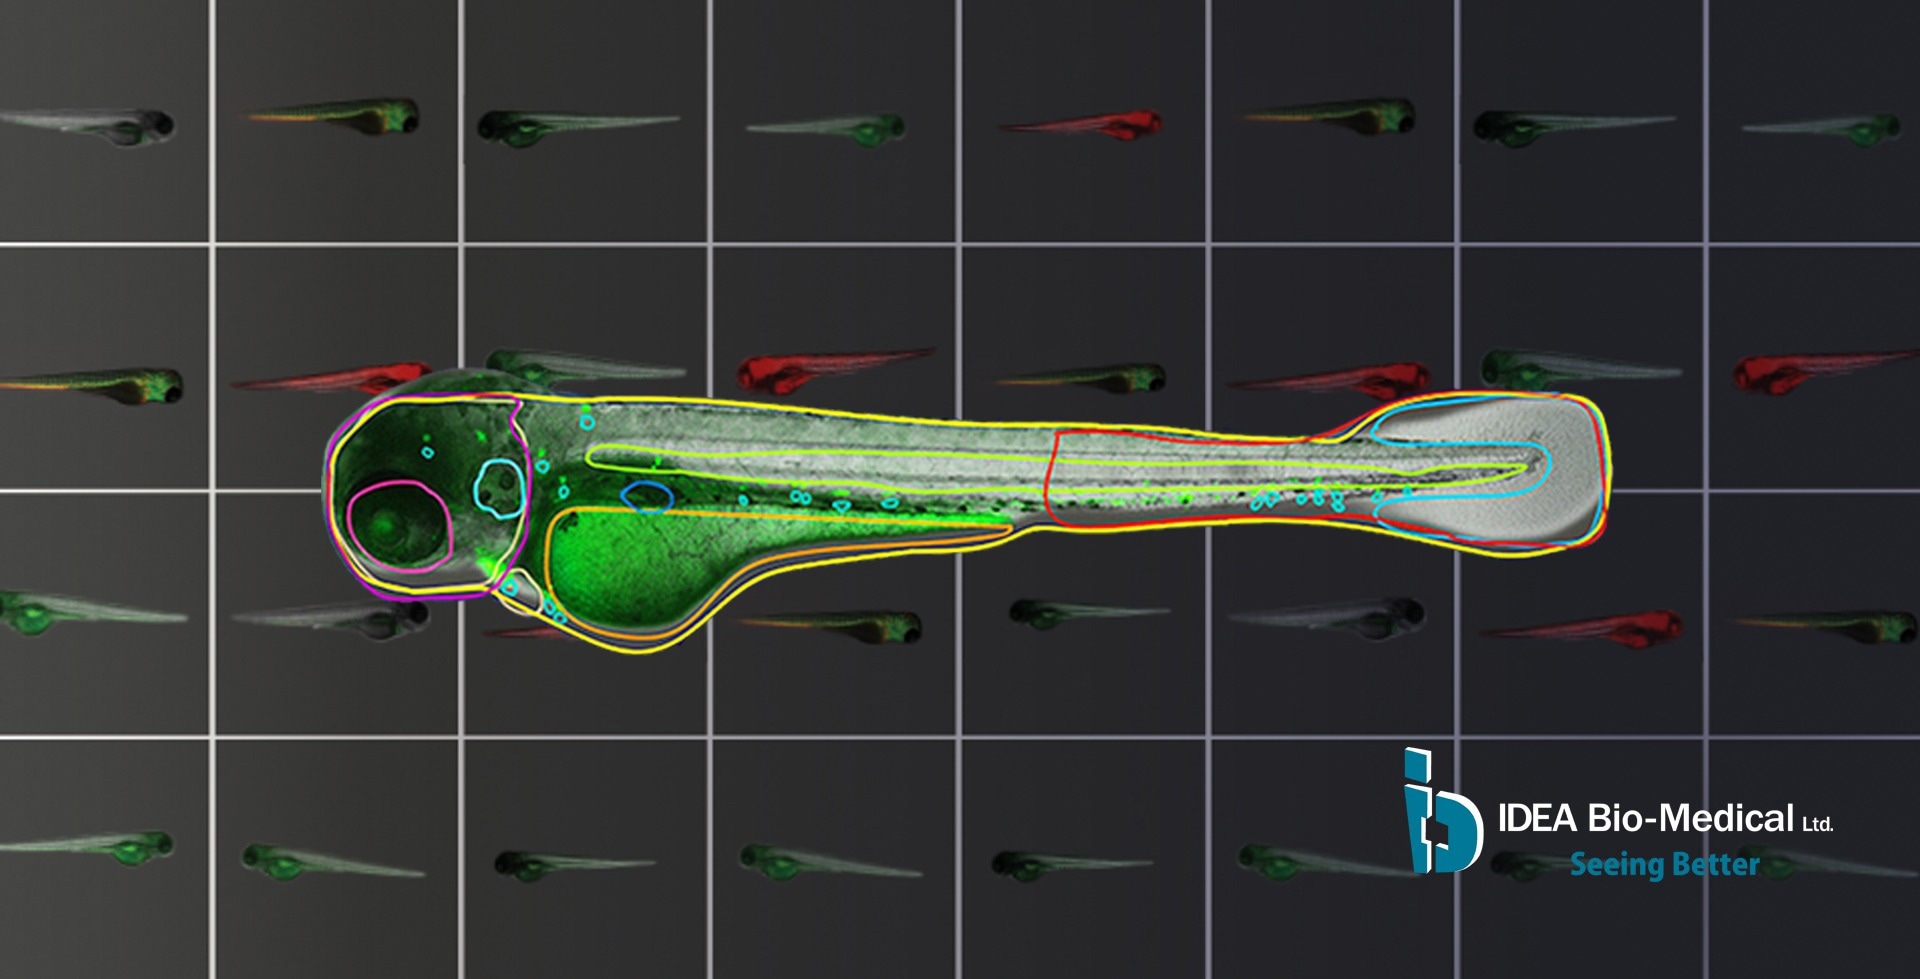 Why do we need information about Zebrafish anatomy to interpret fluorescence signals?